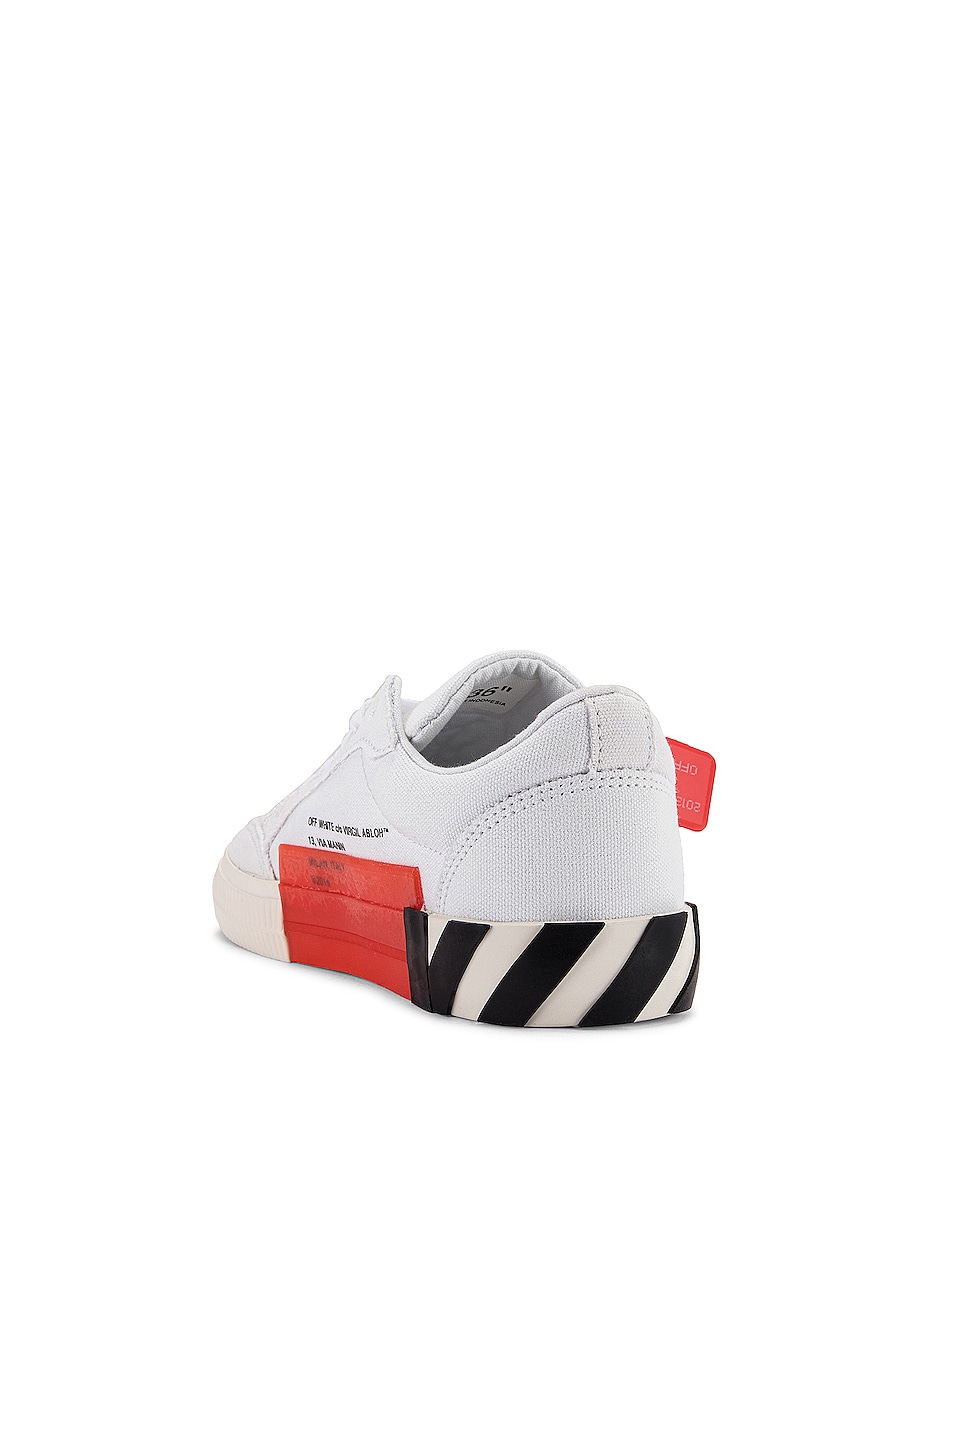 OFF-WHITE Canvas Arrow Low Vulcanized Sneaker in White Violet | FWRD